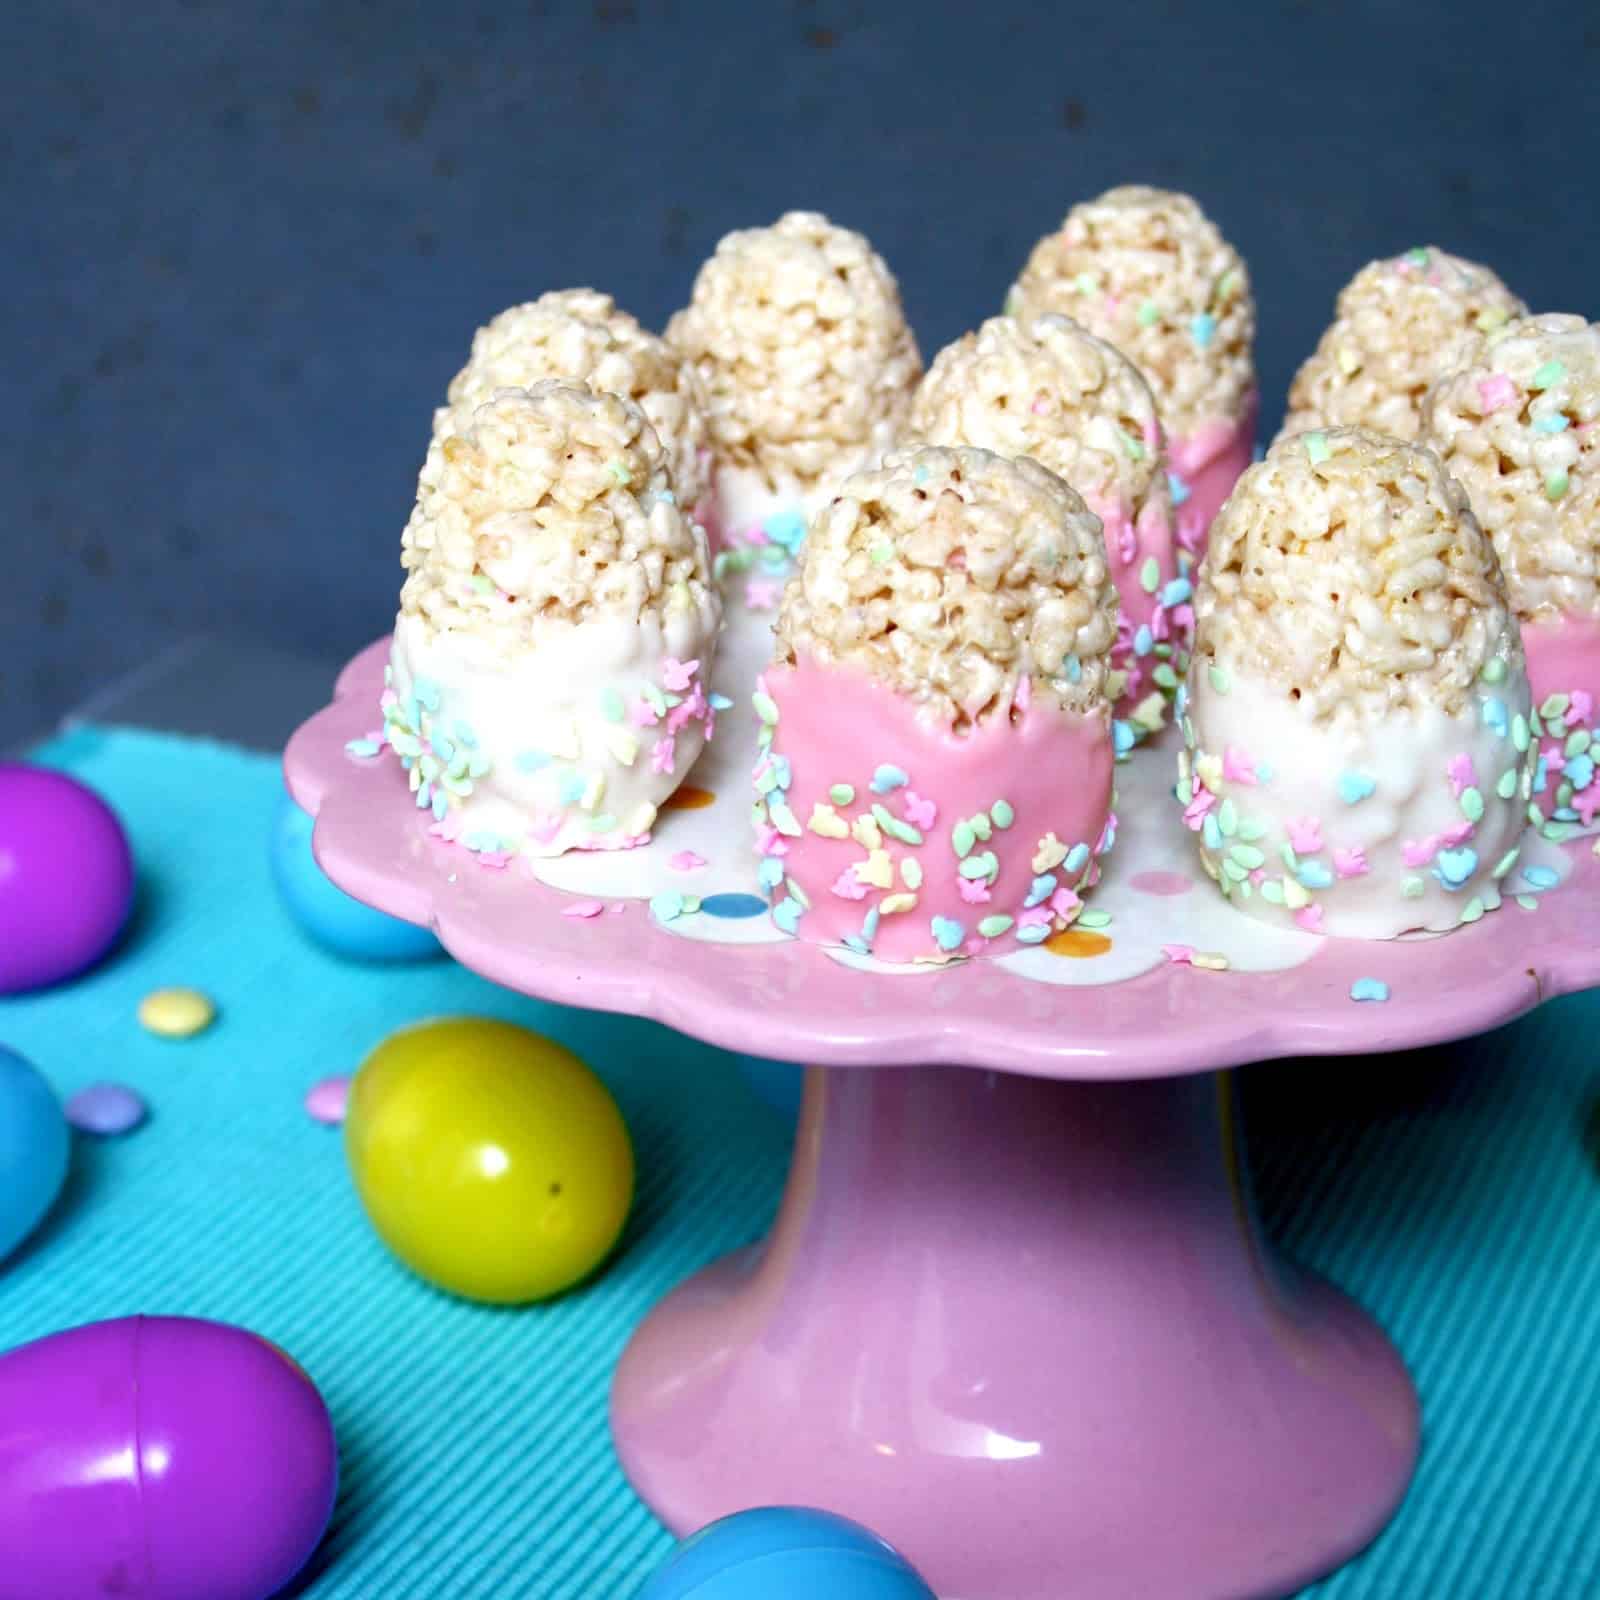 Chocolate Therapy: Chocolate Dipped Easter Egg Rice Krispie Treats